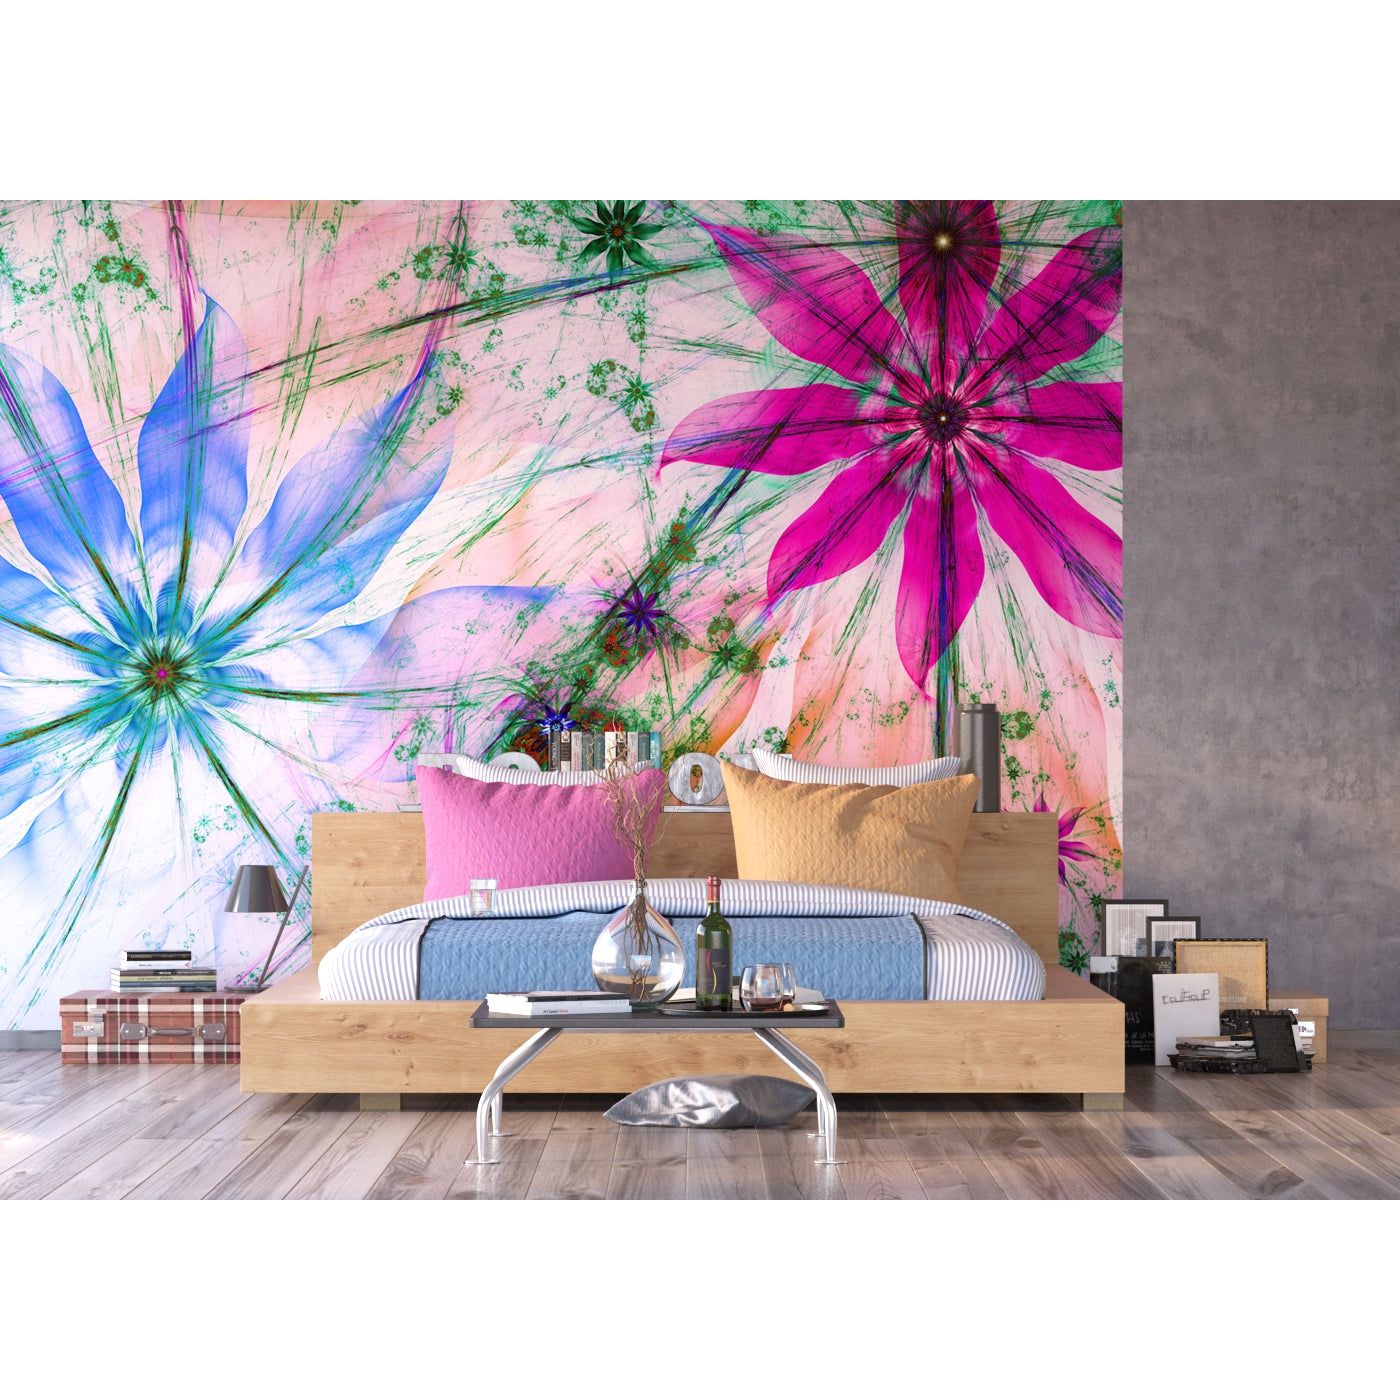 Vibrant Visions: Abstract Floral Kaleidoscope Wall Mural